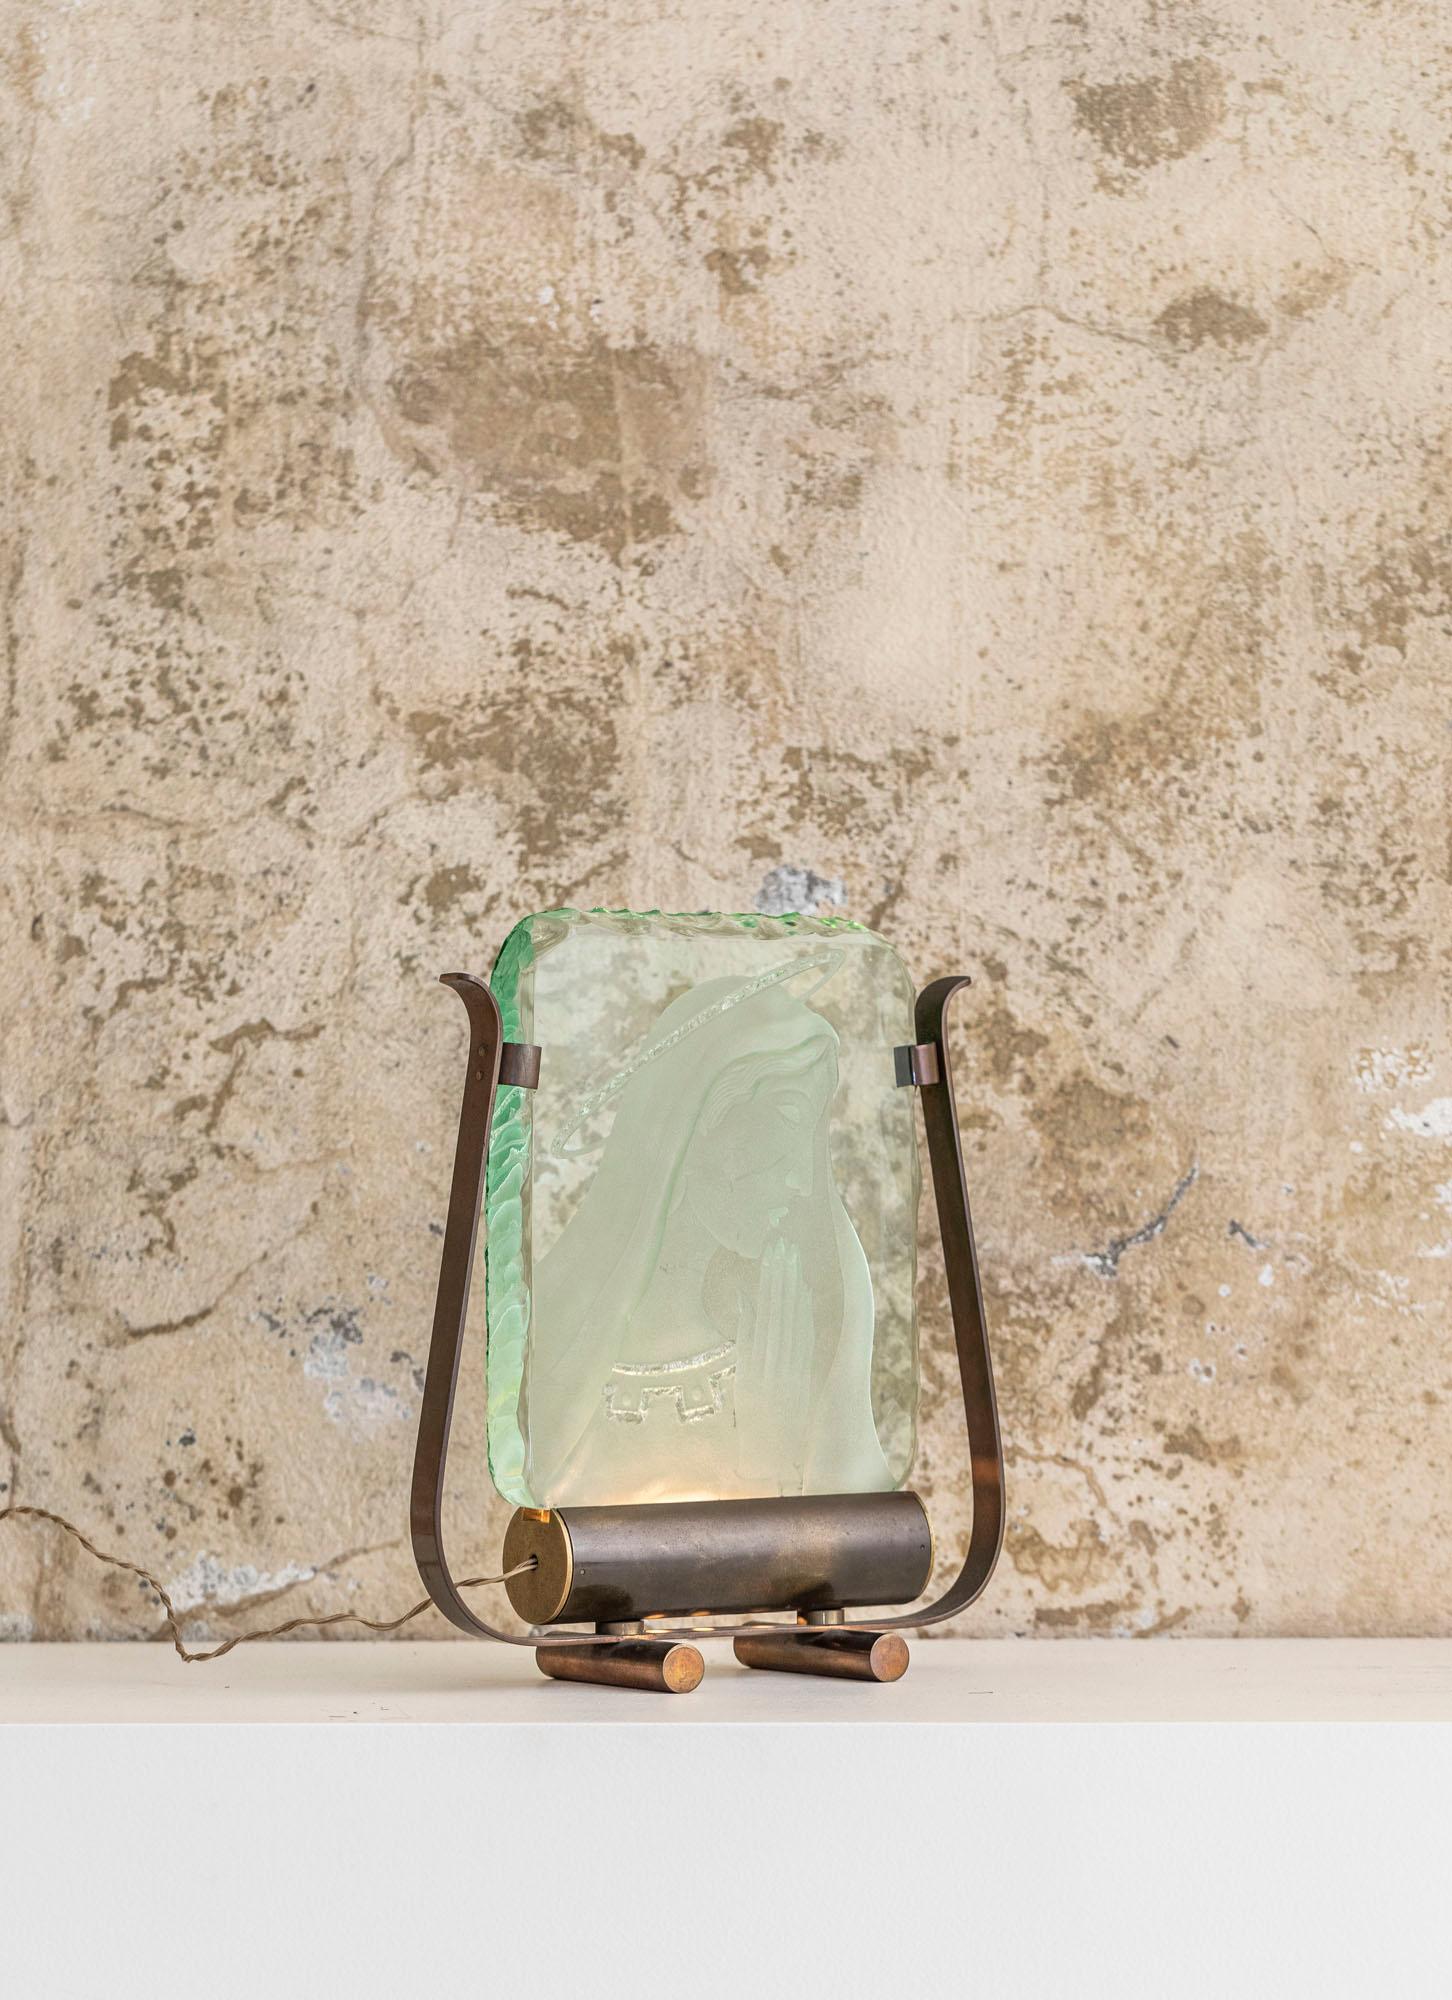 Brass Table Lamp in Green Crystal Glass by Pietro Chiesa, Italy, 1940 ca. For Sale